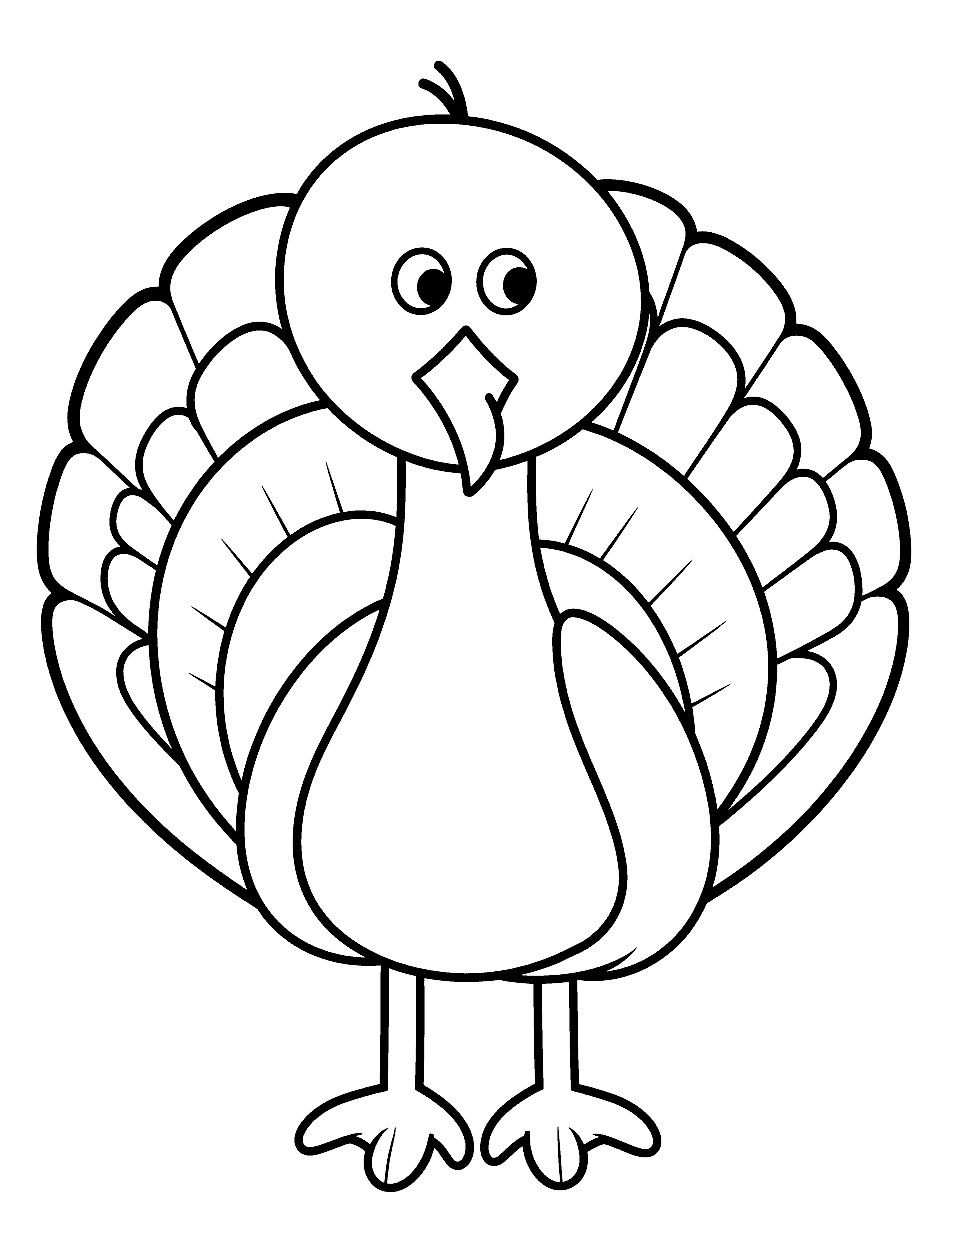 Simple and Cute Turkey Coloring Page - A minimalistic, cute turkey drawing that’s easy to color for kids.